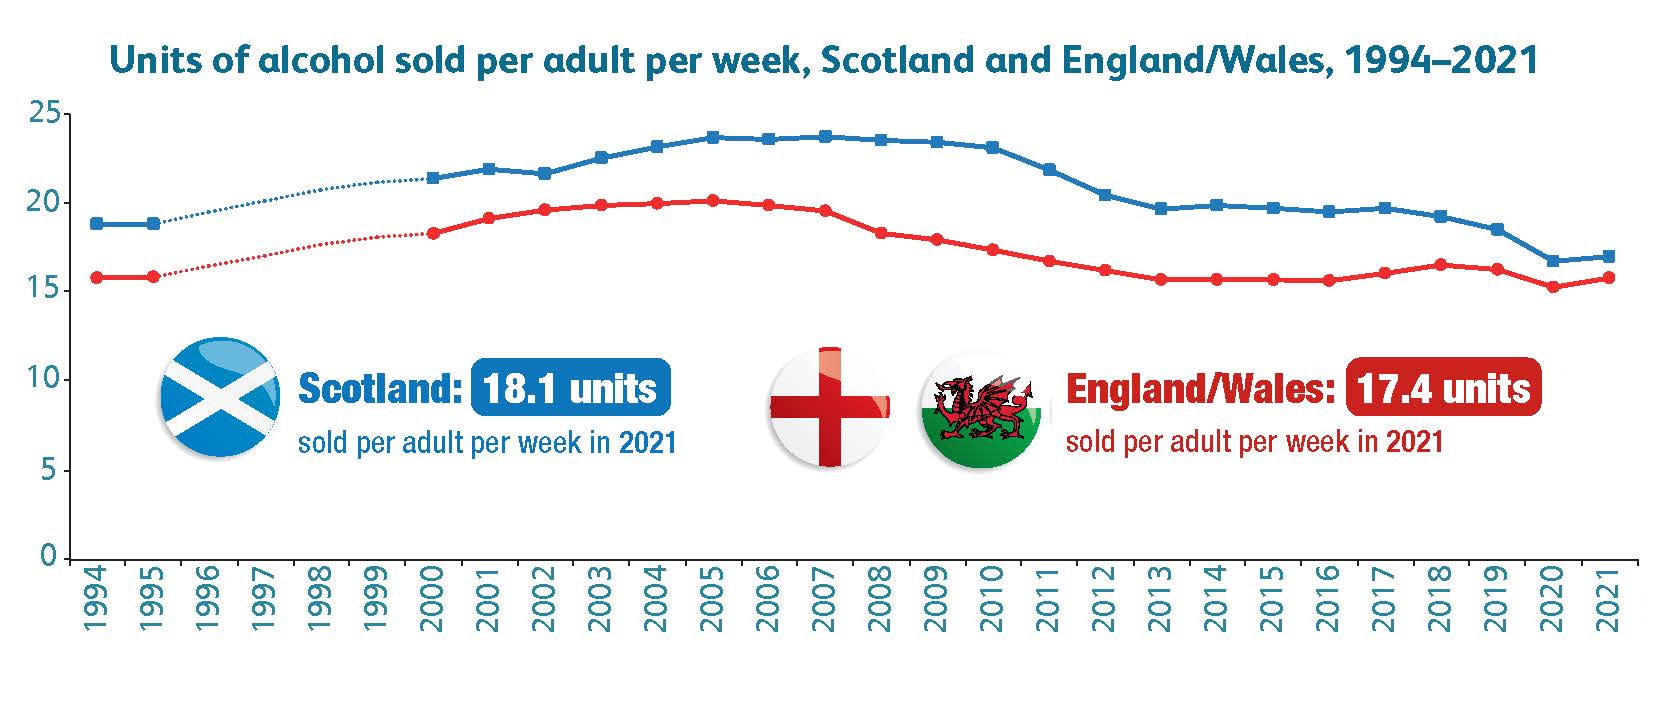 Units per adult: A line chart showing the trend in the average units of alcohol sold per adult per week in Scotland and in England & Wales from 1994-2020. The x-axis presents the years from 1994 to 2020. The y-axis presents the number of units of pure alcohol per adult per week.  It should be noted that data were not available from 1996 to 1999; this is indicated by dotted lines between these years in the trends shown. 
Description of the trend for Scotland: In 1994, 19.3 units were sold per adult in Scotland each week. This rose to 22.4 units per week in 2005 and stayed at around this level until 2010 when it started to fall.  By 2013 the volume of pure alcohol sold per adult had fallen to 19.9 units per week, and it remained around this level until 2018. The volume of pure alcohol sold per adult per week then decreased, and by 2021 it was the lowest in the time series, at 18.1 units.